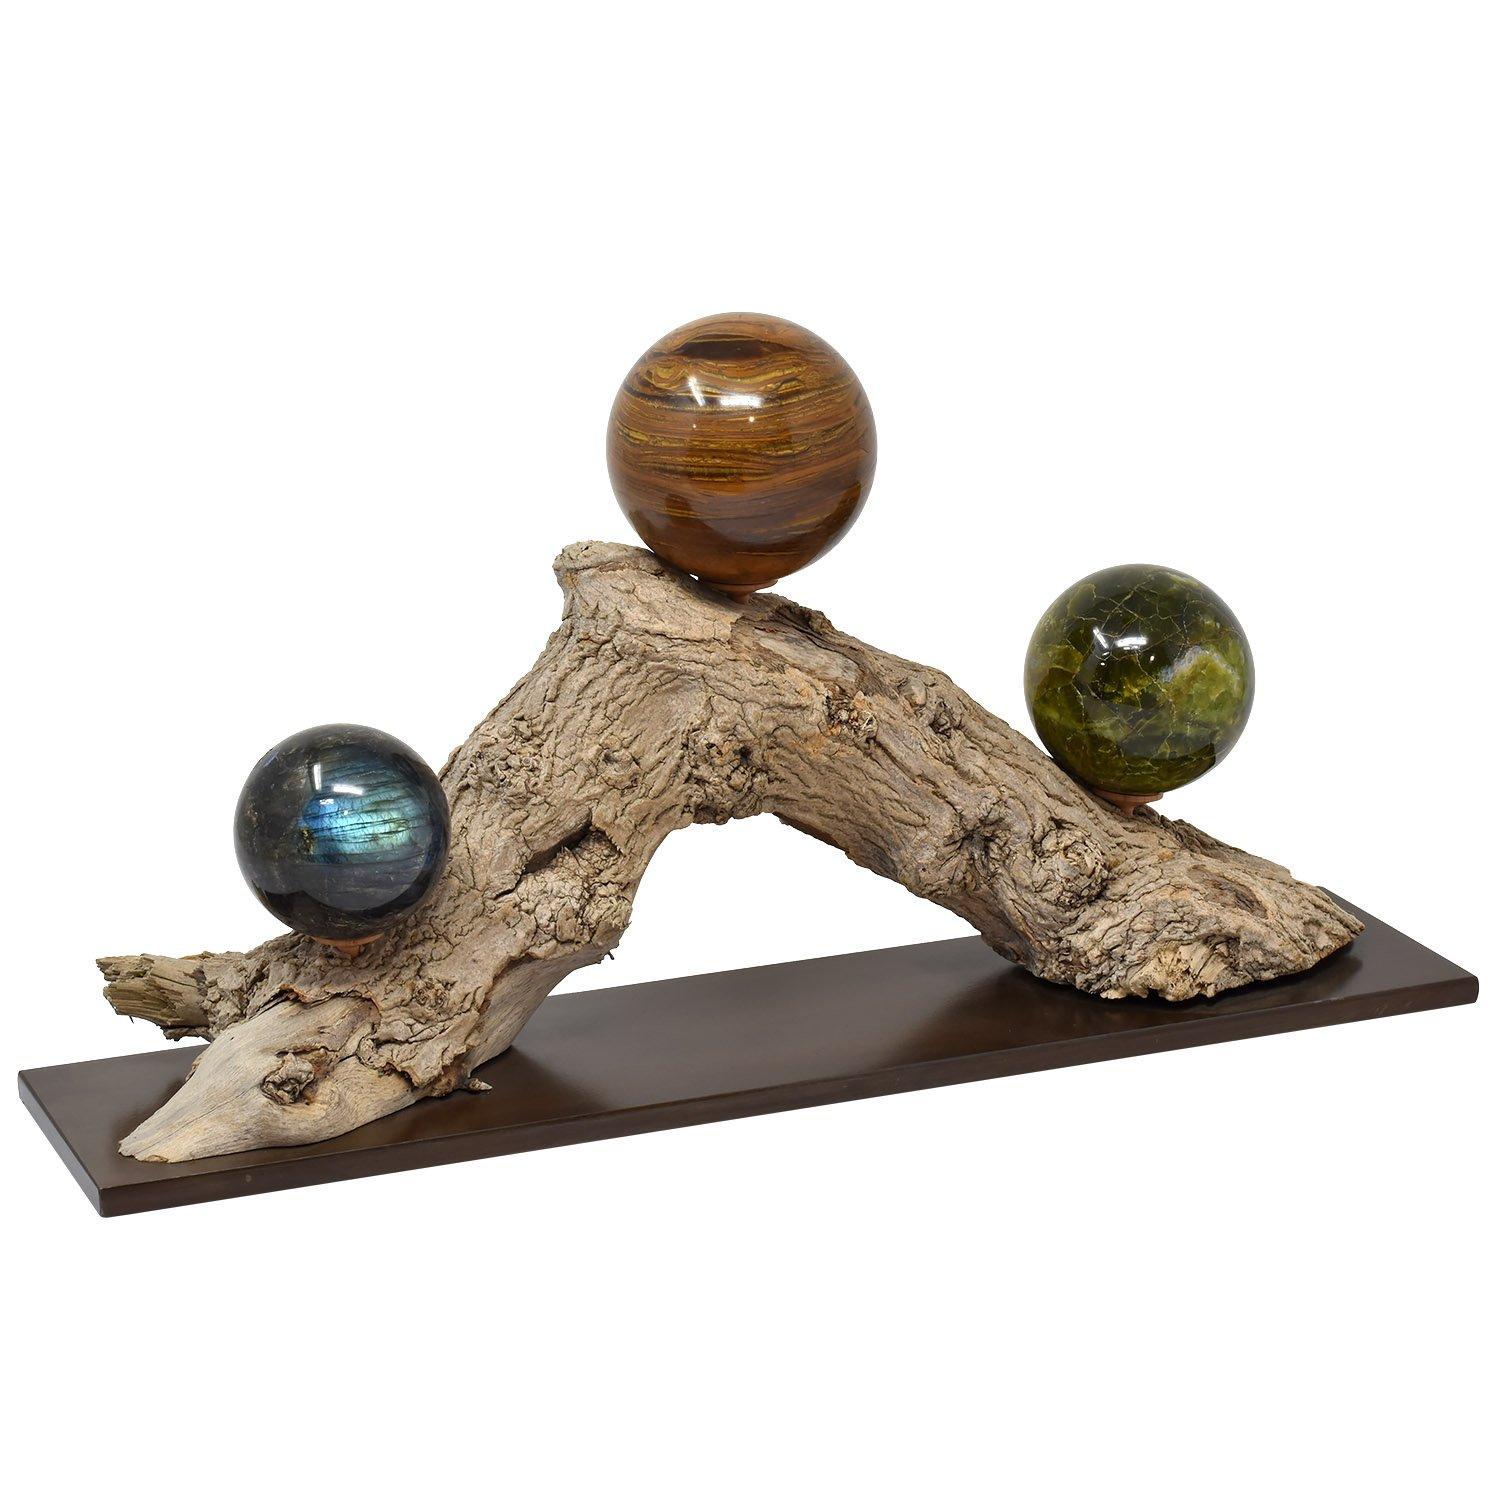 Three Mineral Spheres mounted on an Organic wood branch #ZW1

Labradorite, Tiger Iron Jasper, and Green Opal
Set of 3 as pictured
Measures: Diameters from left to right: 2.5, 3.25, 3 in./ 6.5, 8.25, 7.5 cm

Custom mounted to complement the